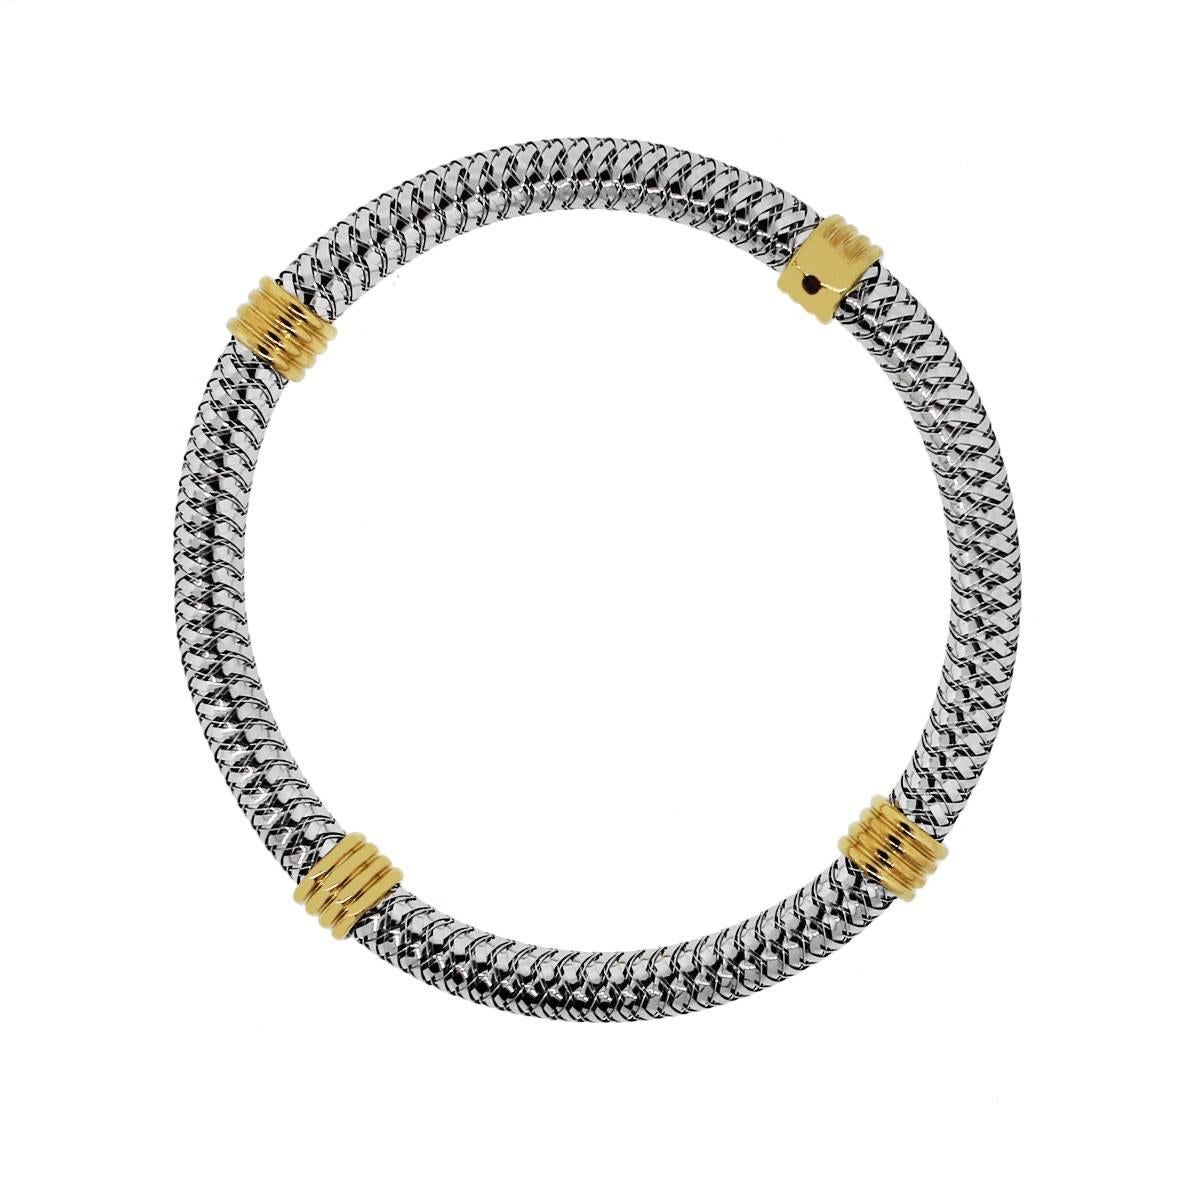 Brand: Roberto Coin
Style: 4 Station bangle
Material: 18k White Gold and yellow gold
Total Weight: 16.2g (10.4dwt)
Bracelet Length: 6.5″
Clasp: No clasp. Flexible bangle
Additional Details: This item comes with a Raymond Lee Jewelers presentation